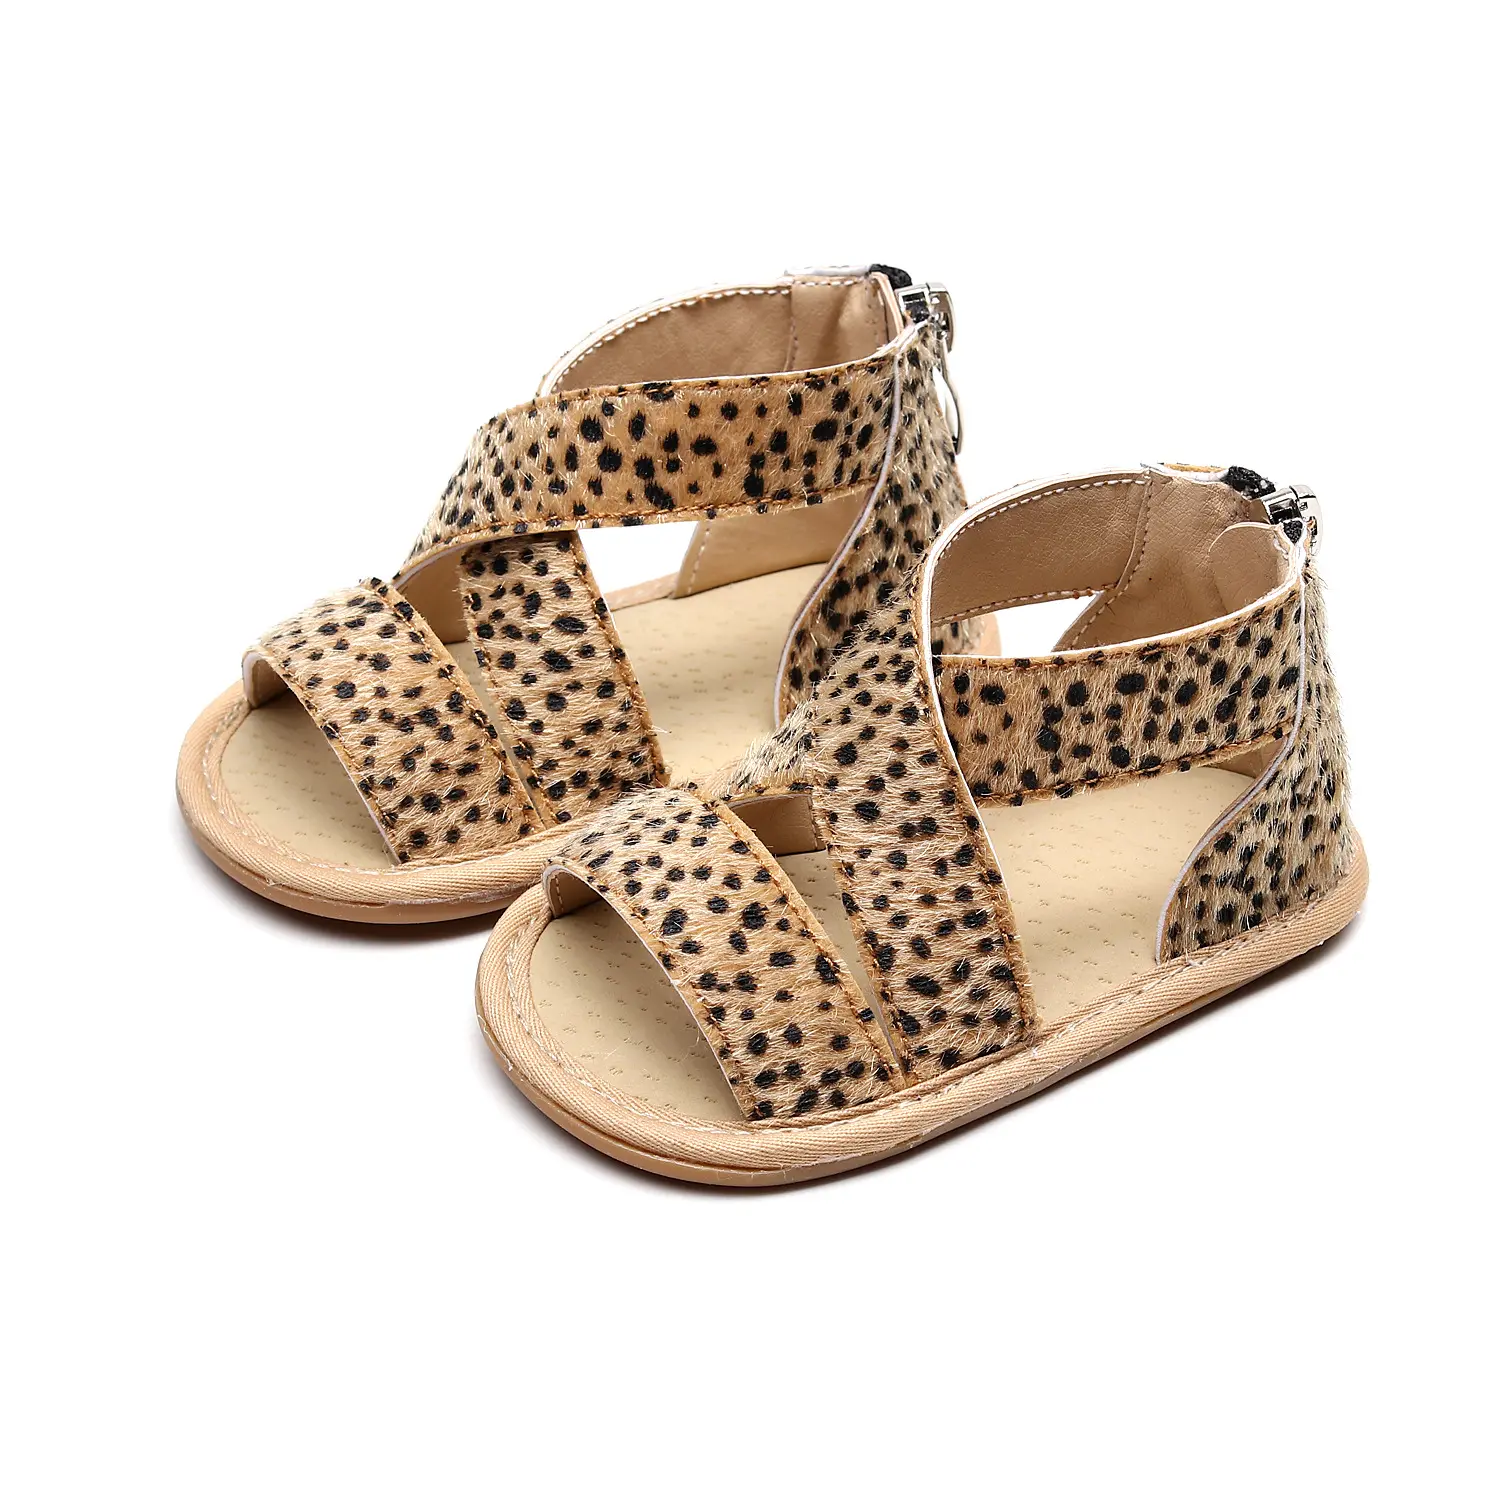 2022 new children's leopard print baby sandals baby toddler shoes non-slip sole baby shoes manufacturers